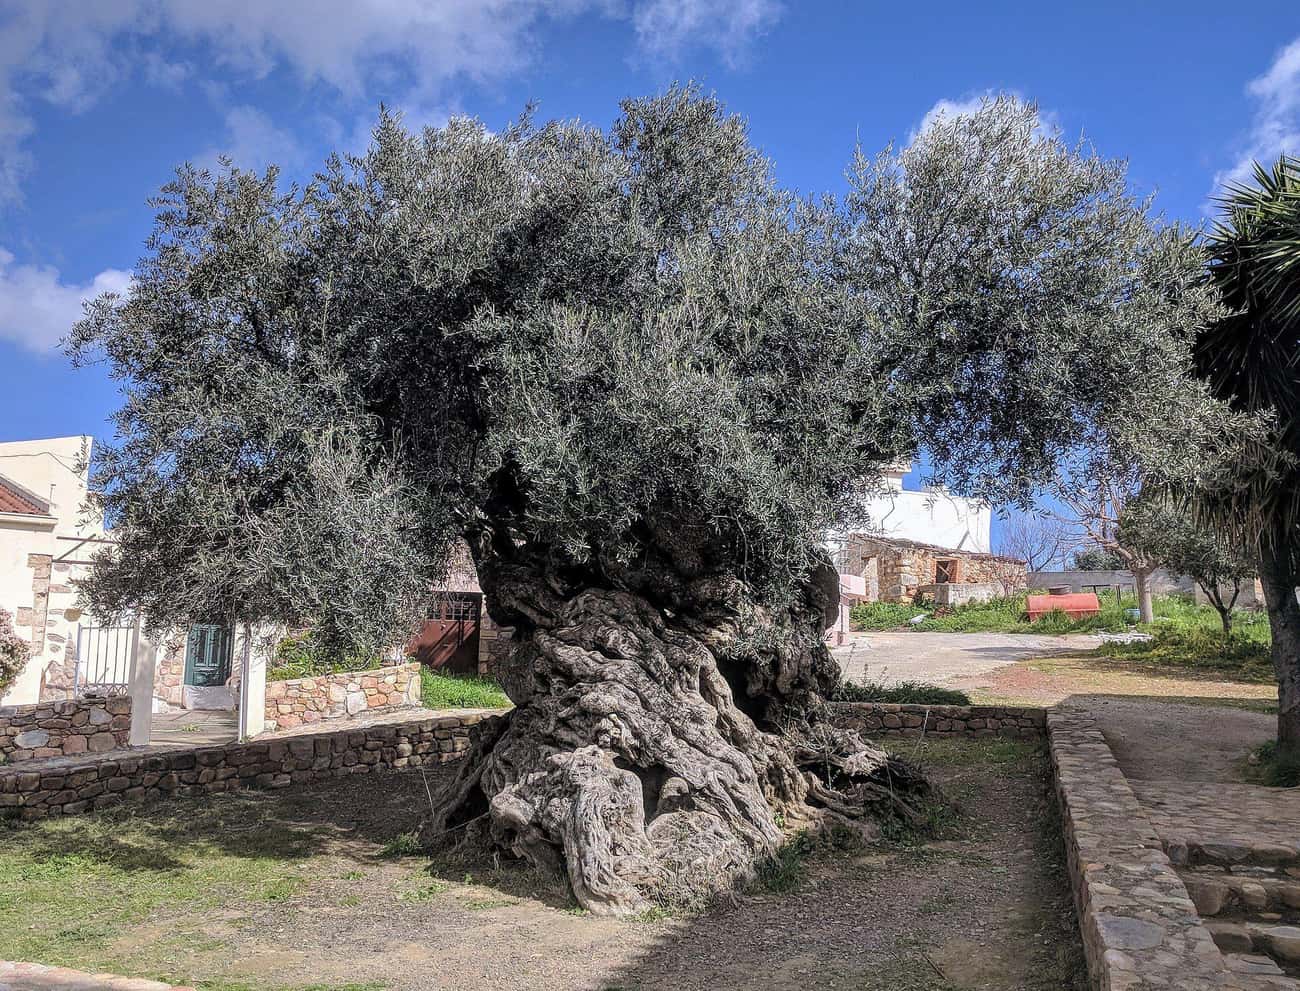 A 2,000-Year-Old Olive Tree In Greece That Still Produces Olives